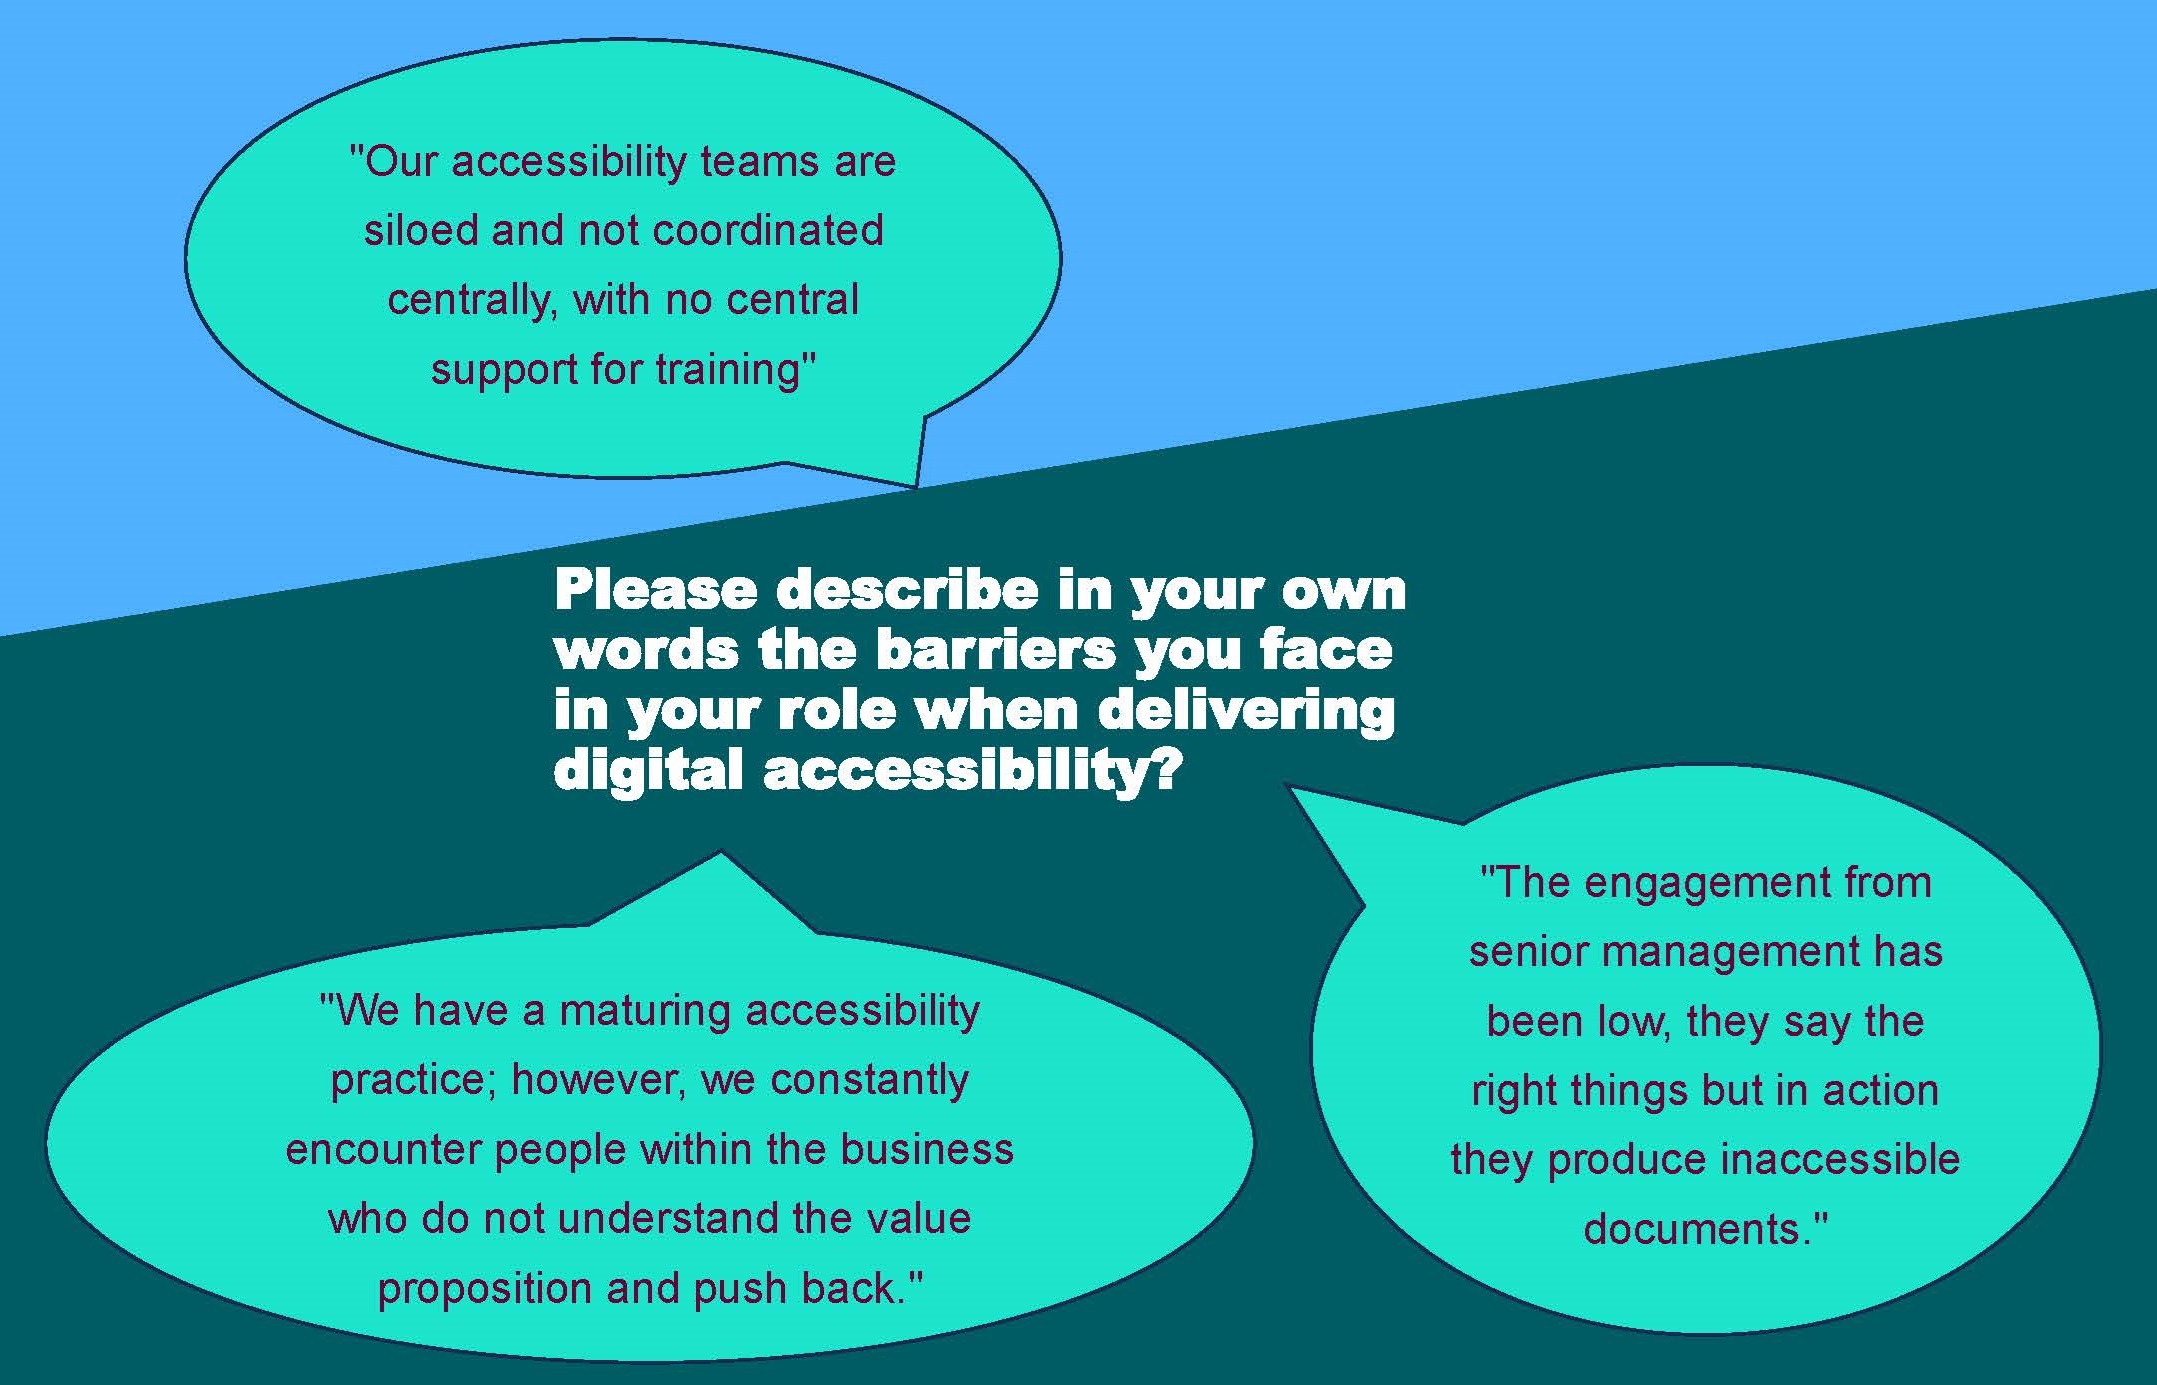 Set of quotes from slide lifted from report. Text reads: Please describe in your own words the barriers you face in your role when delivering digital accessibility? "Our accessibility teams are siloed and not coordinated centrally, with no central support for training." - and " We have a maturing accessibility practice, however, we constantly encounter people within the business who do not understand the value proposition and push back" - and "The engagement from senior management has been low, they say the right things but in action they produce inaccessible documents."